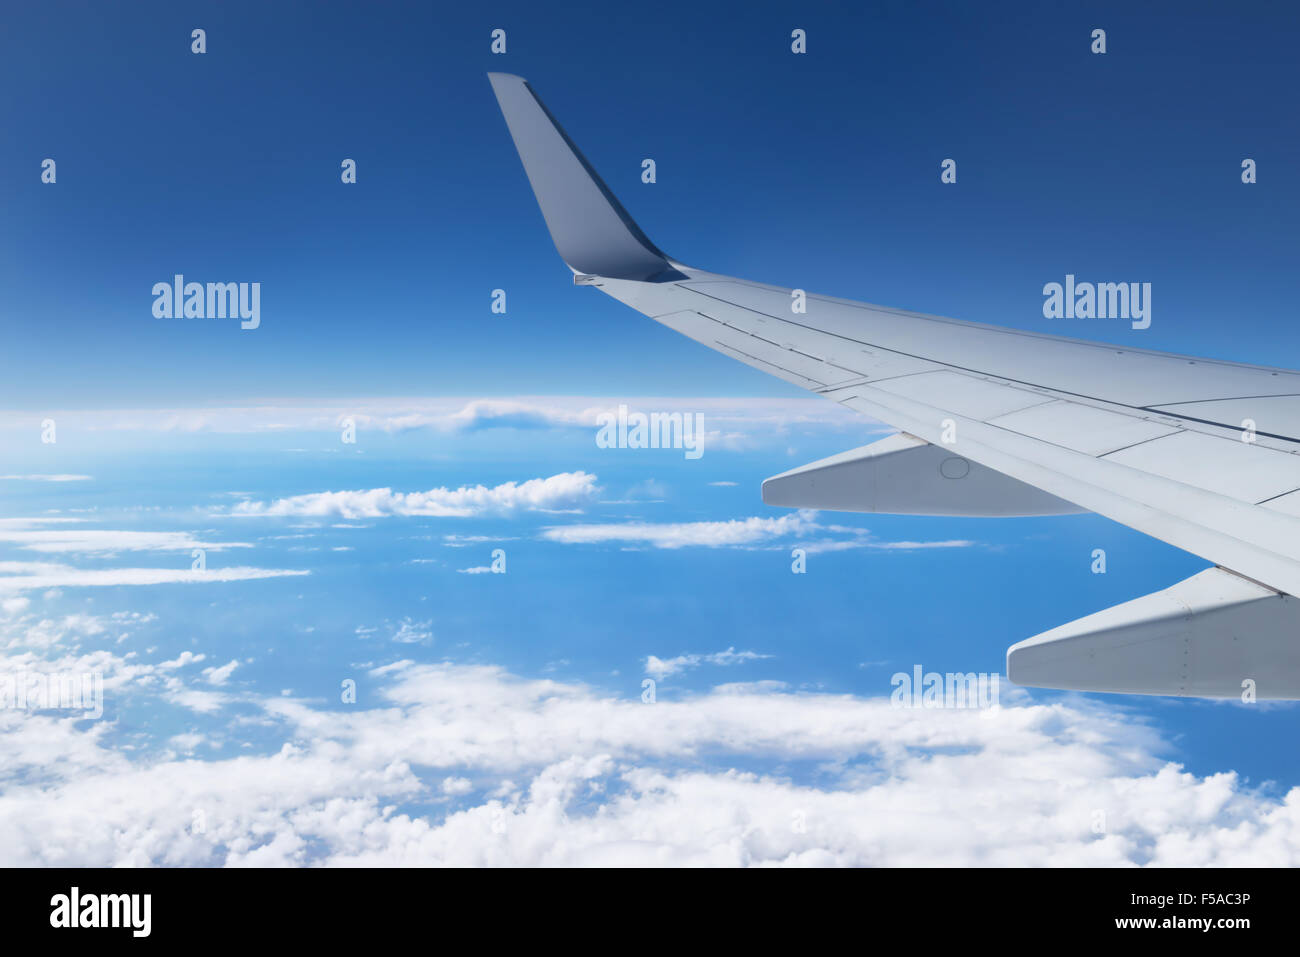 Airplane wing in the sky flying above clouds. Stock Photo